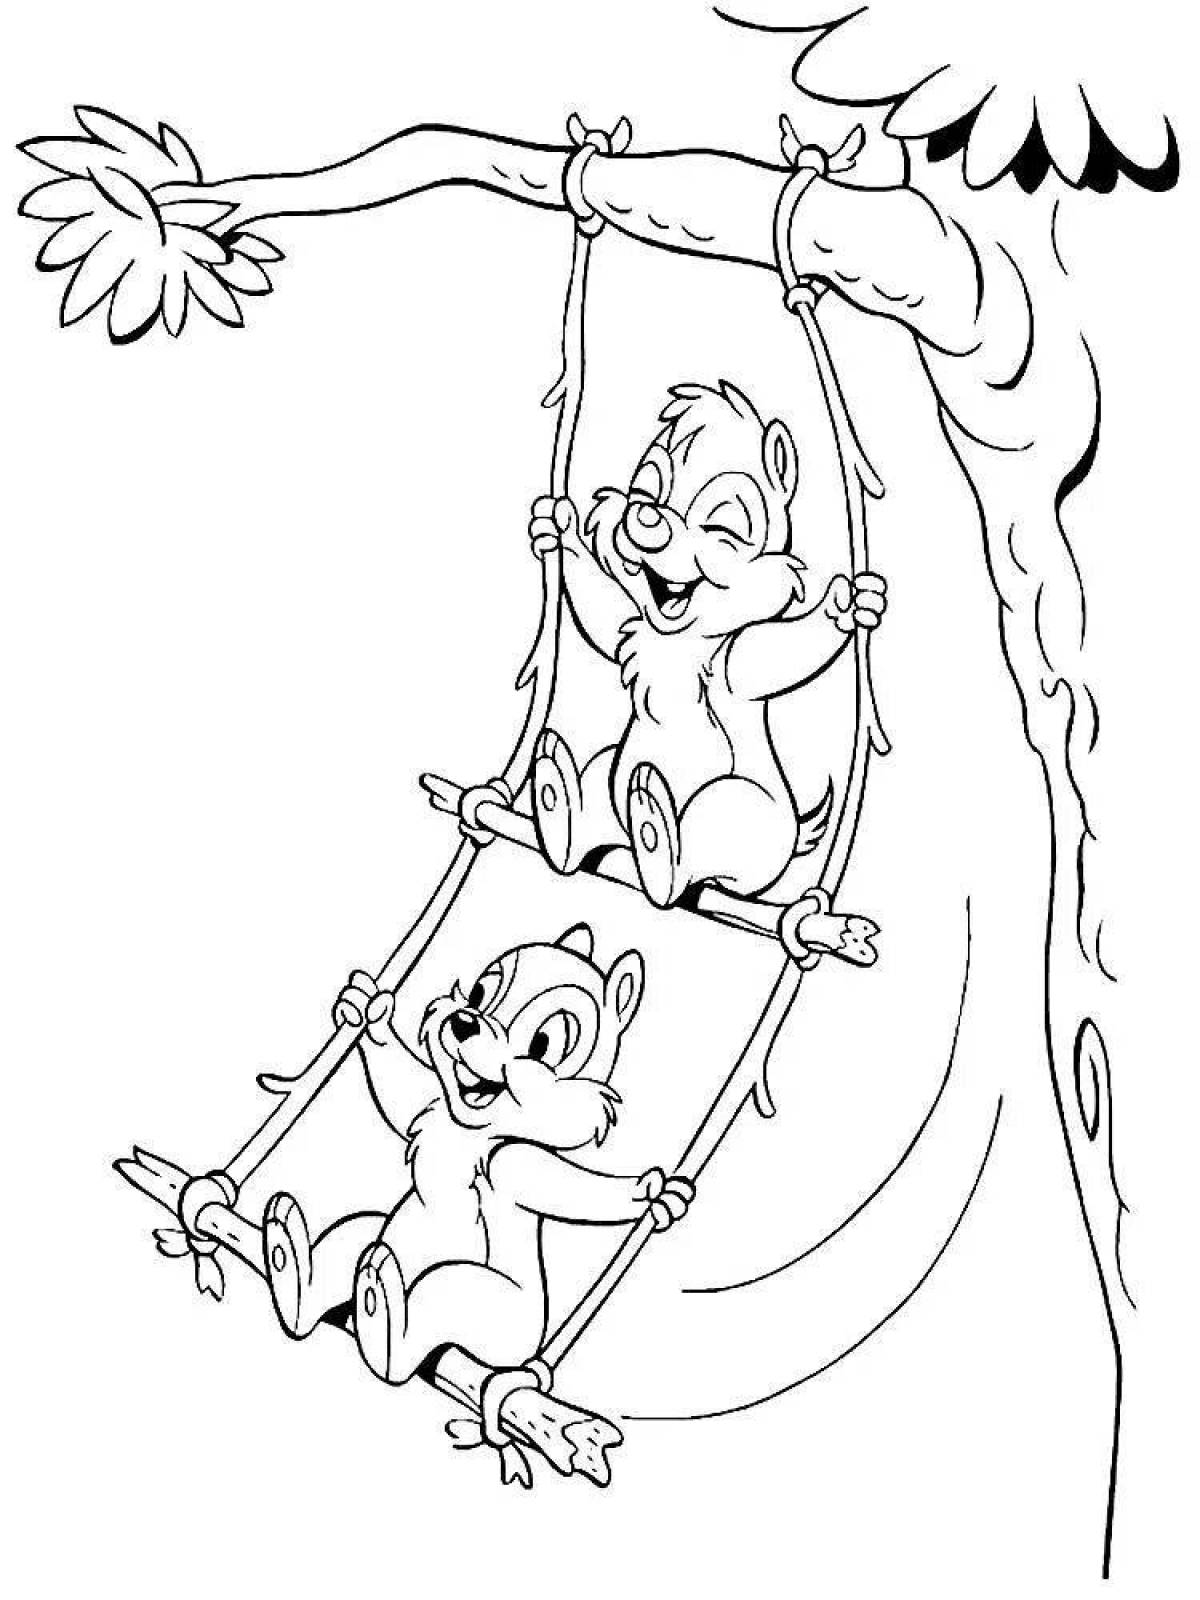 Charming chip and dale coloring page